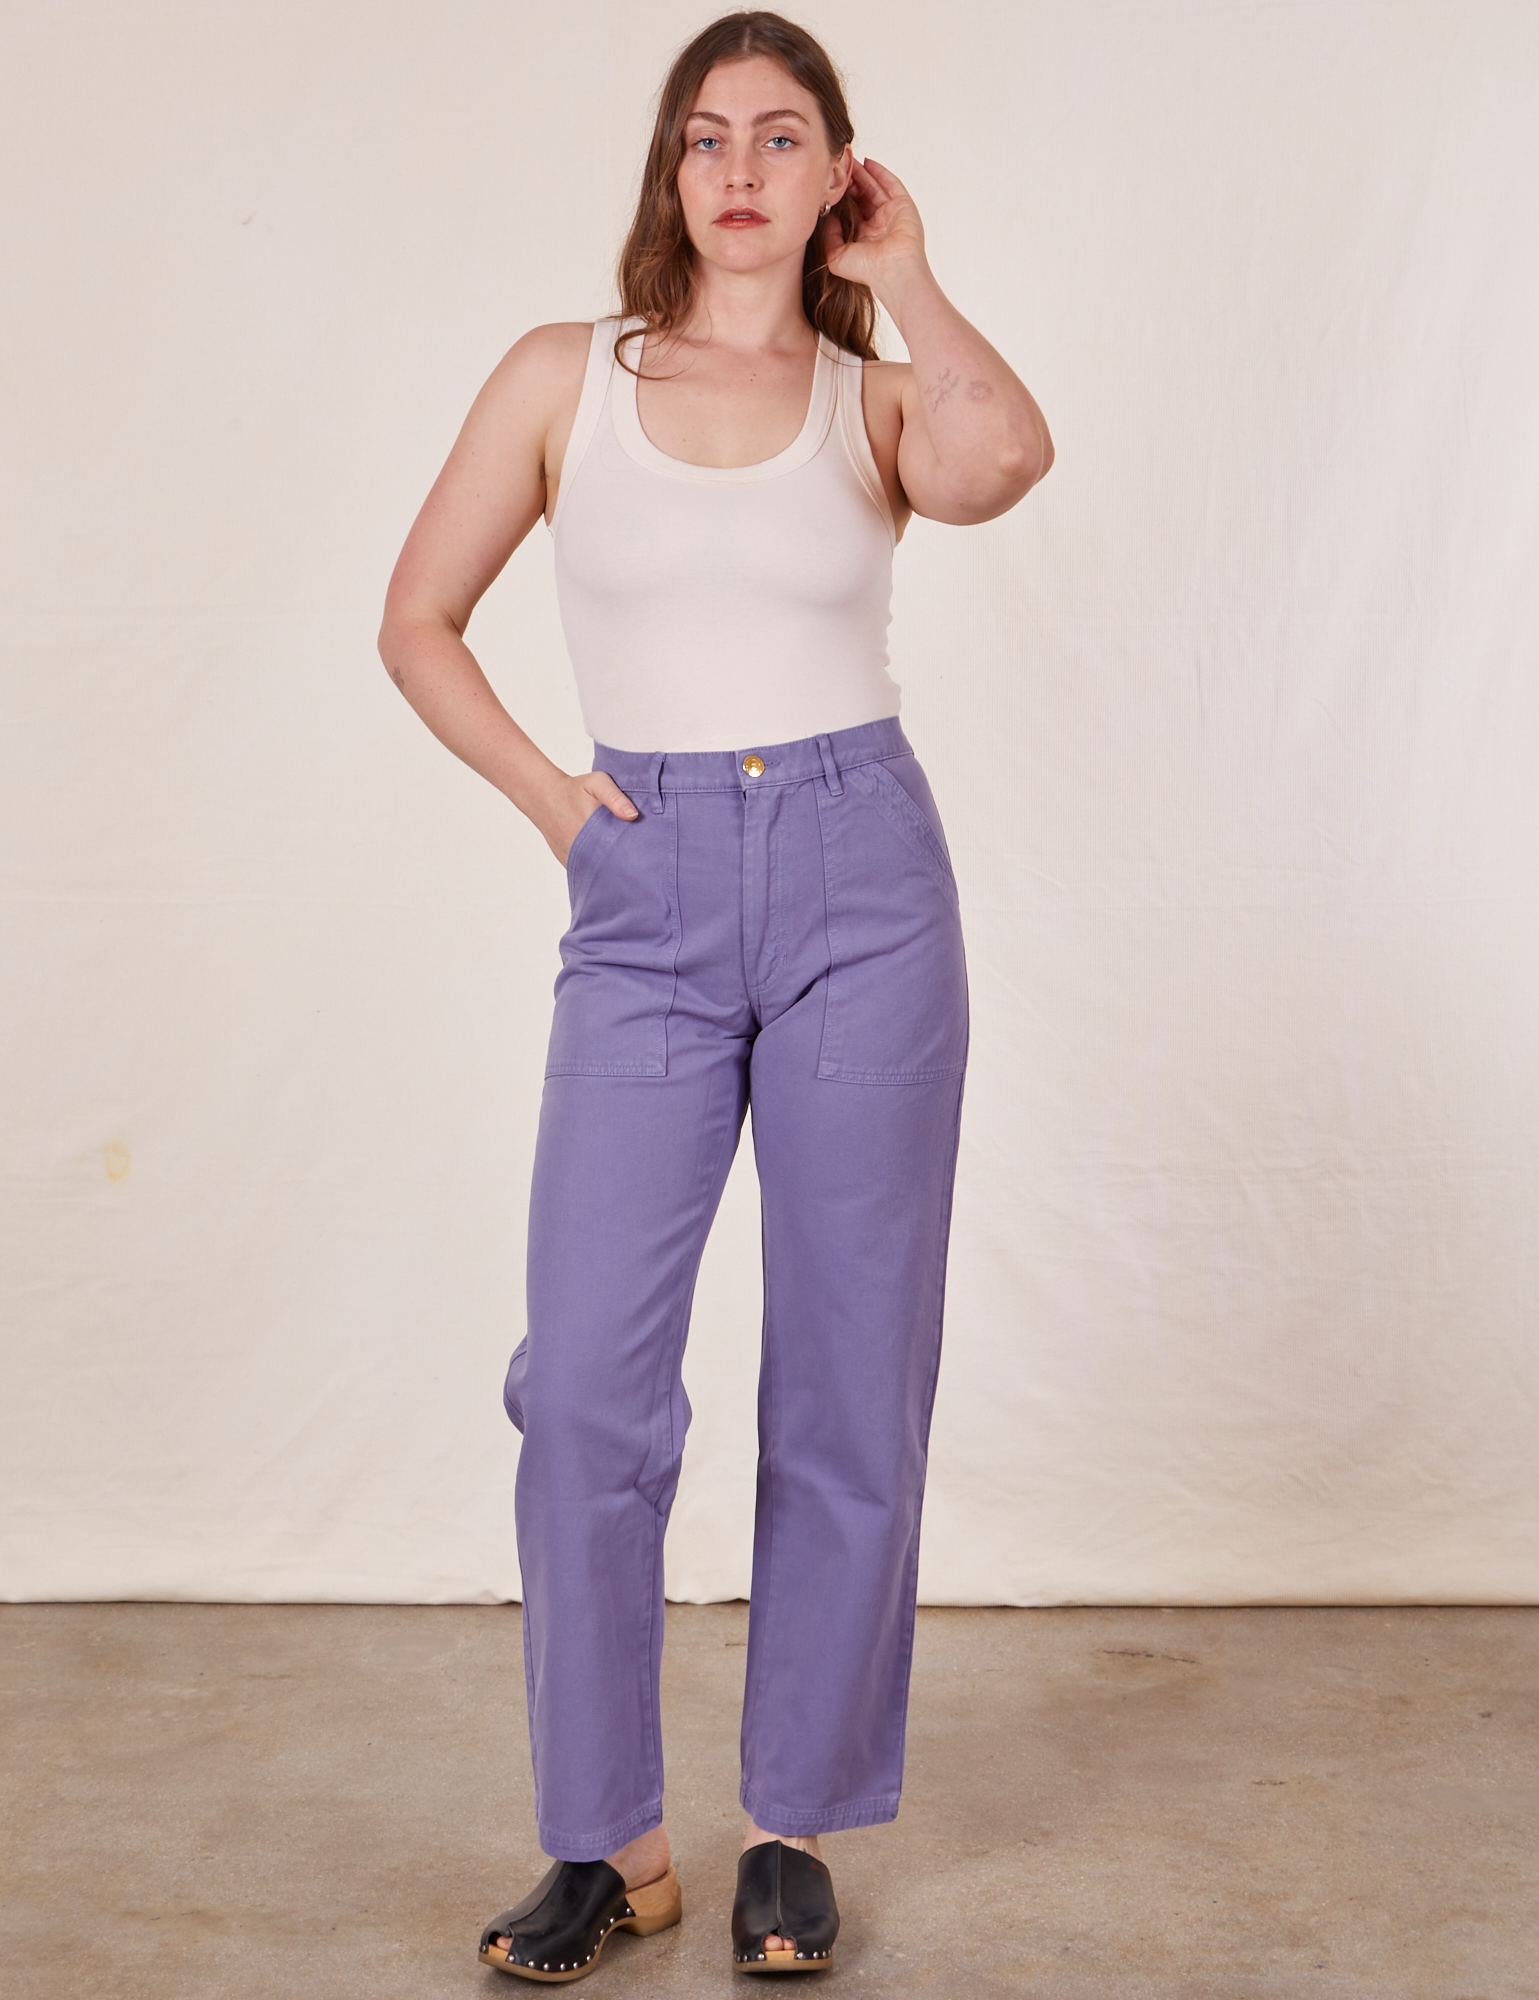 Allison is 5&#39;10&quot; and wearing Long S Work Pants in Faded Grape paired with vintage off-white Tank Top